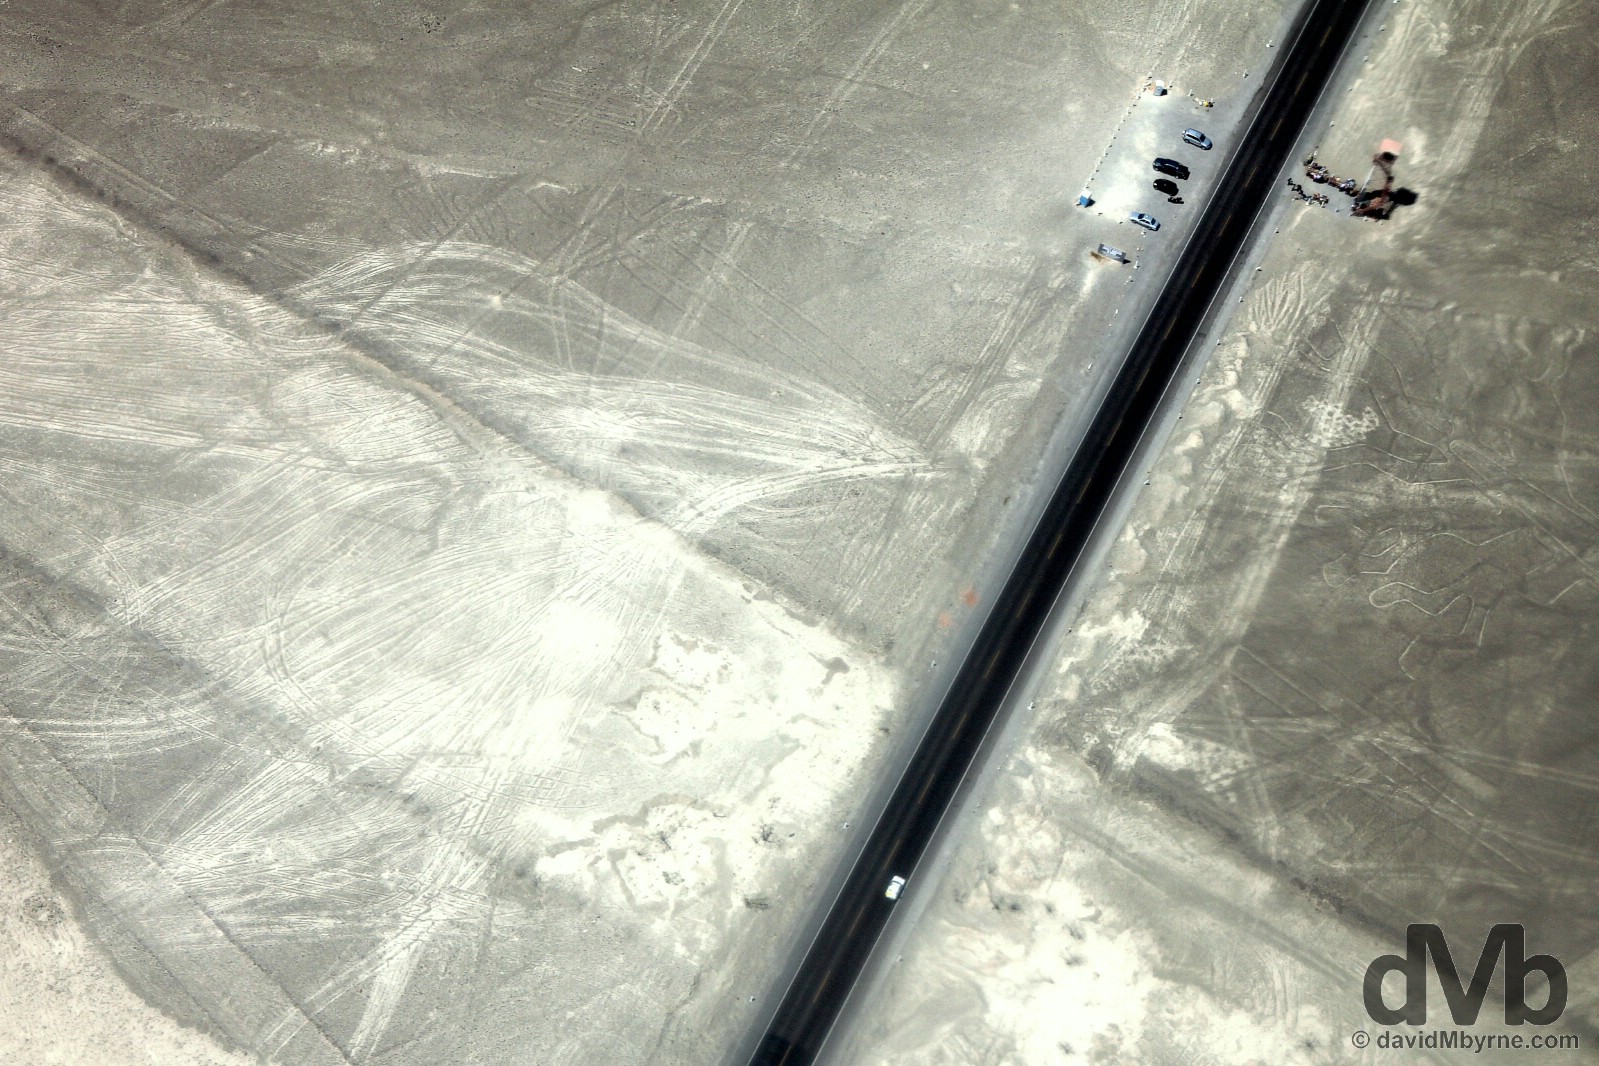 The viewing tower of the Nasca Lines and a section of the Pan-American Highway through the Nasca Plain as seen from on high. Nasca Plain, southern Peru. August 11, 2015. 